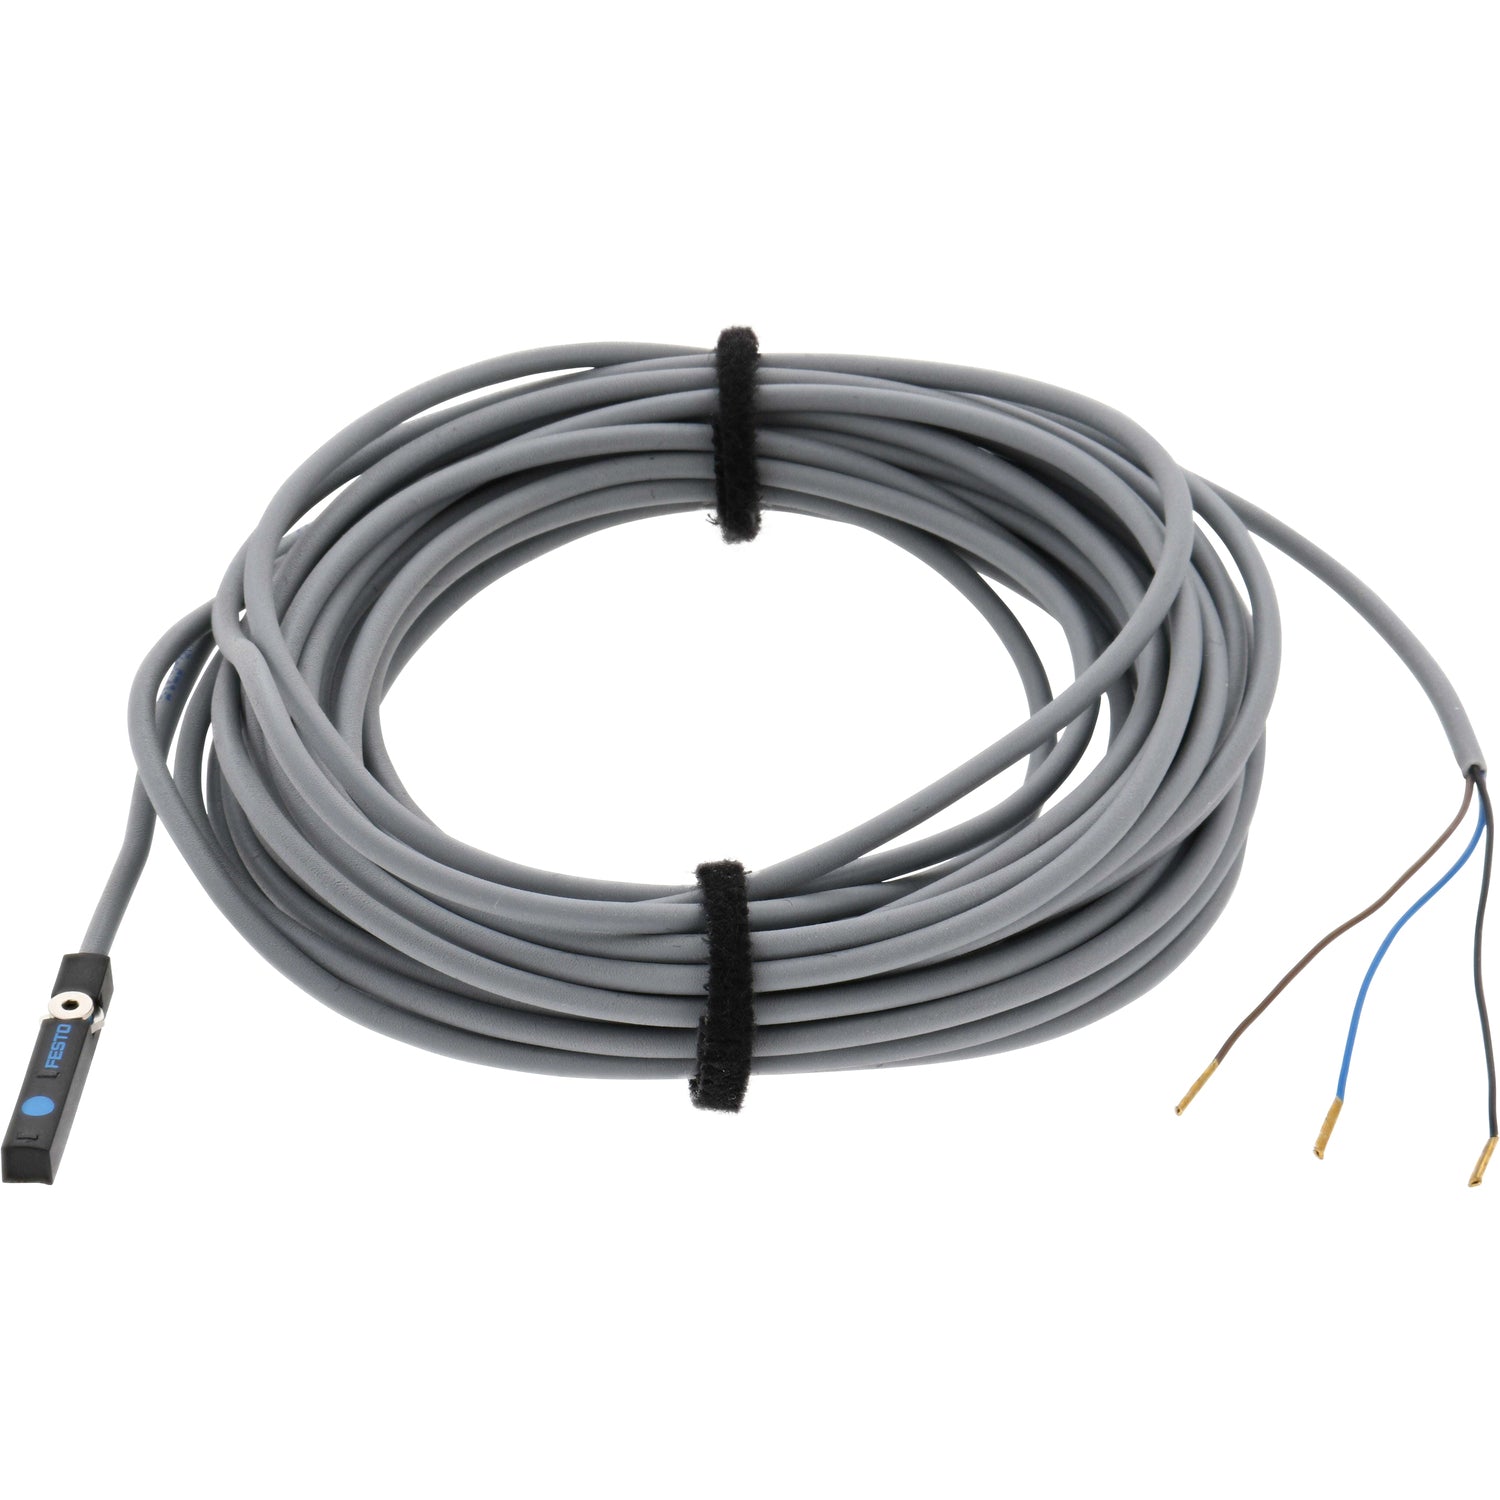 Grey, coiled connecting cable with small, black, rectangular sensor on one end and exposed blue, brown, and black wires on other end. Sensor and cable are shown on a white back ground. 551386